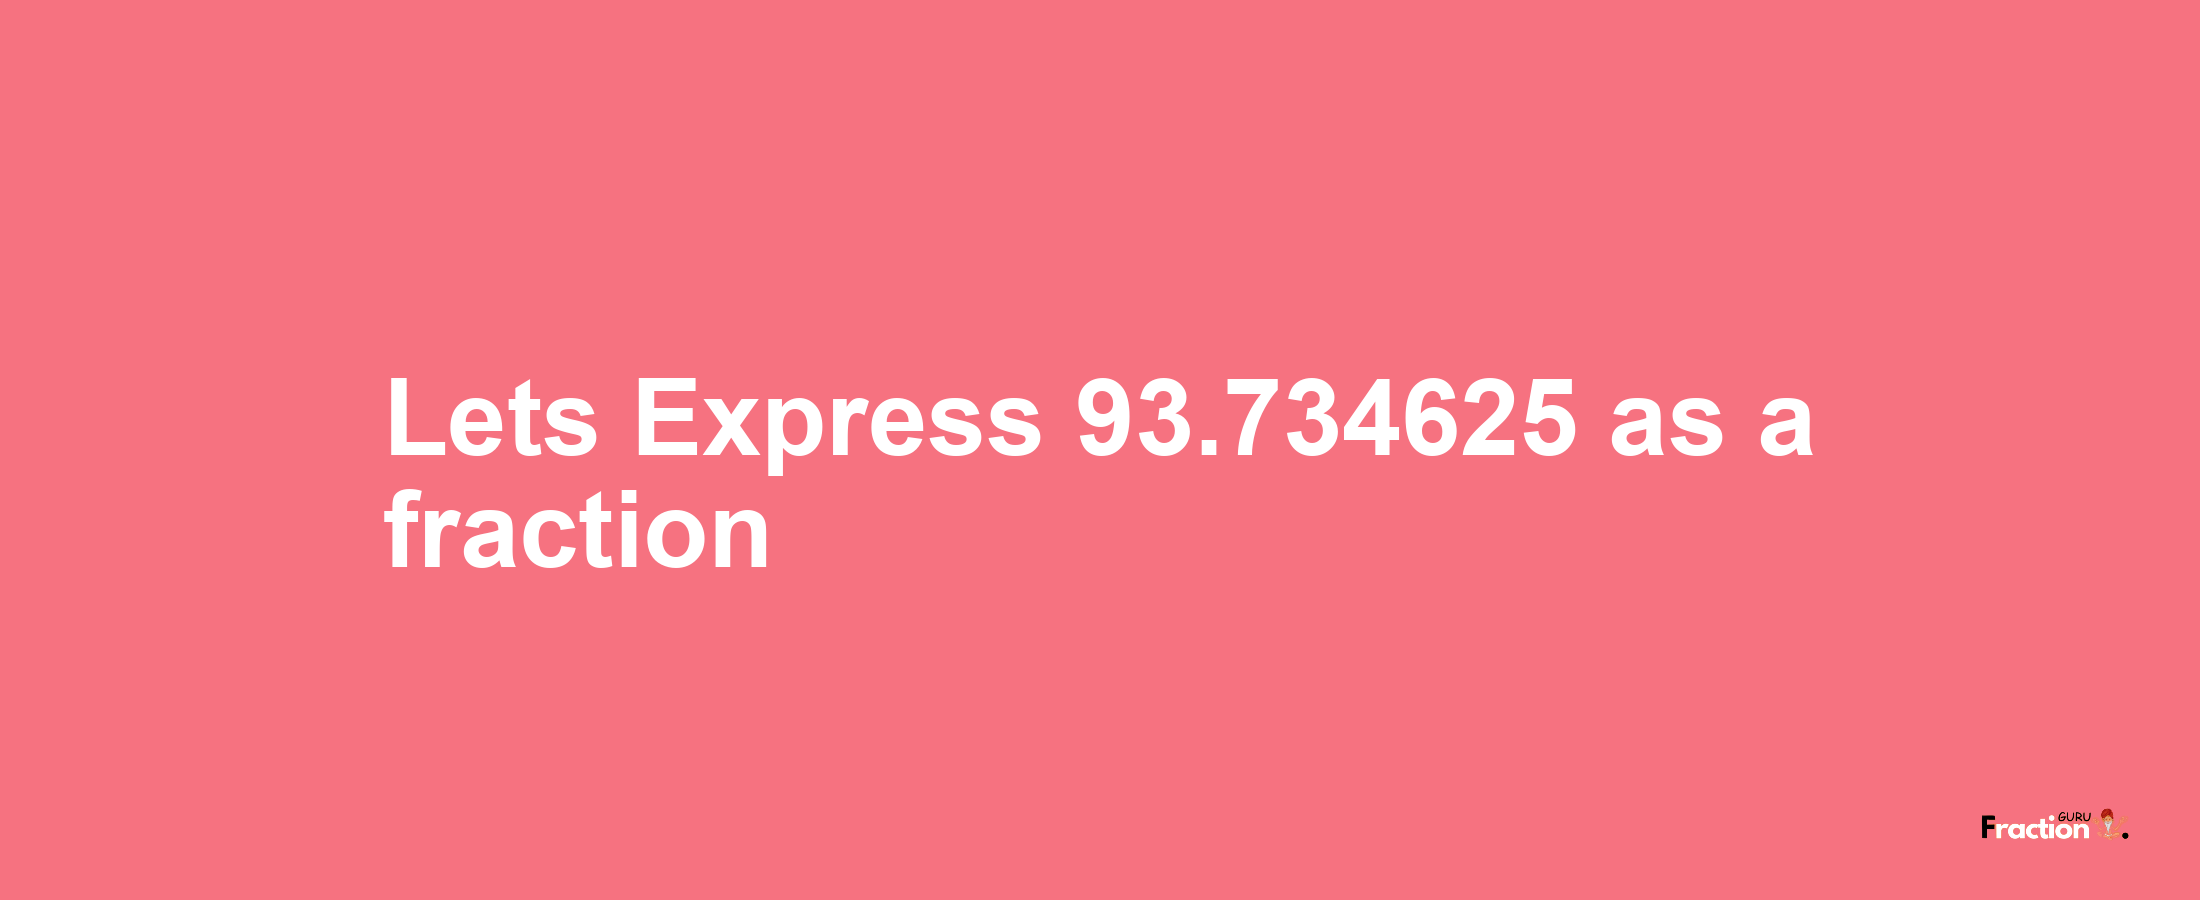 Lets Express 93.734625 as afraction